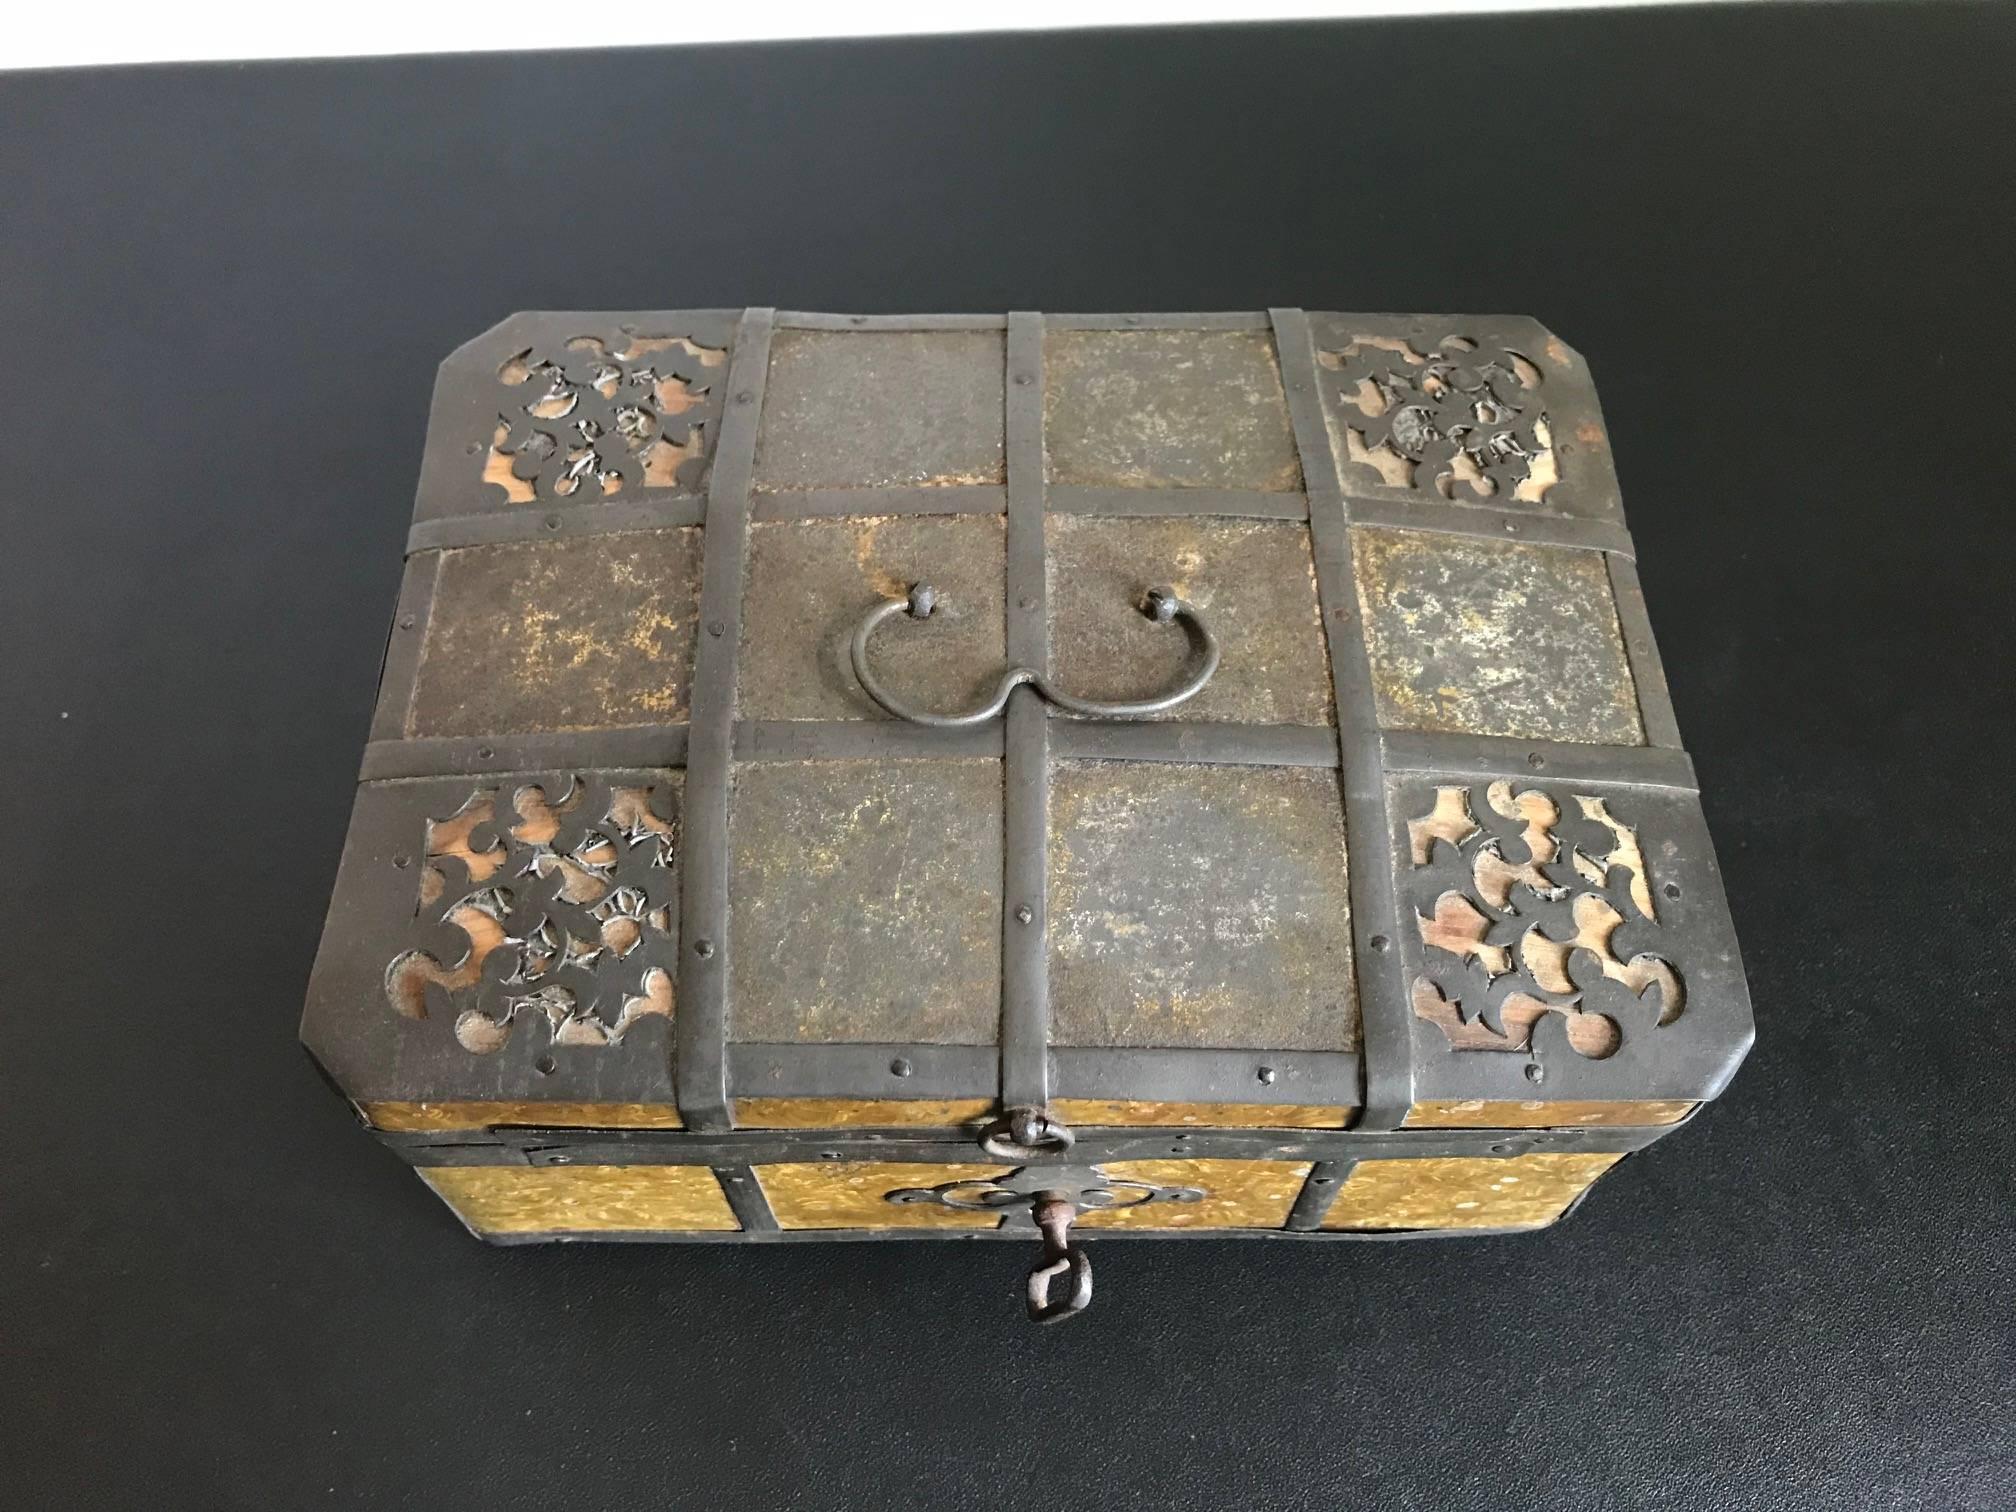 A rare early 19th century Russian iron-bound box decorated with gilt metal 'Frost' pattern. The beautiful gold panels meant to mimic frost on glass. Retaining the original key, the lock in working order, it makes an usual musical tone when the key